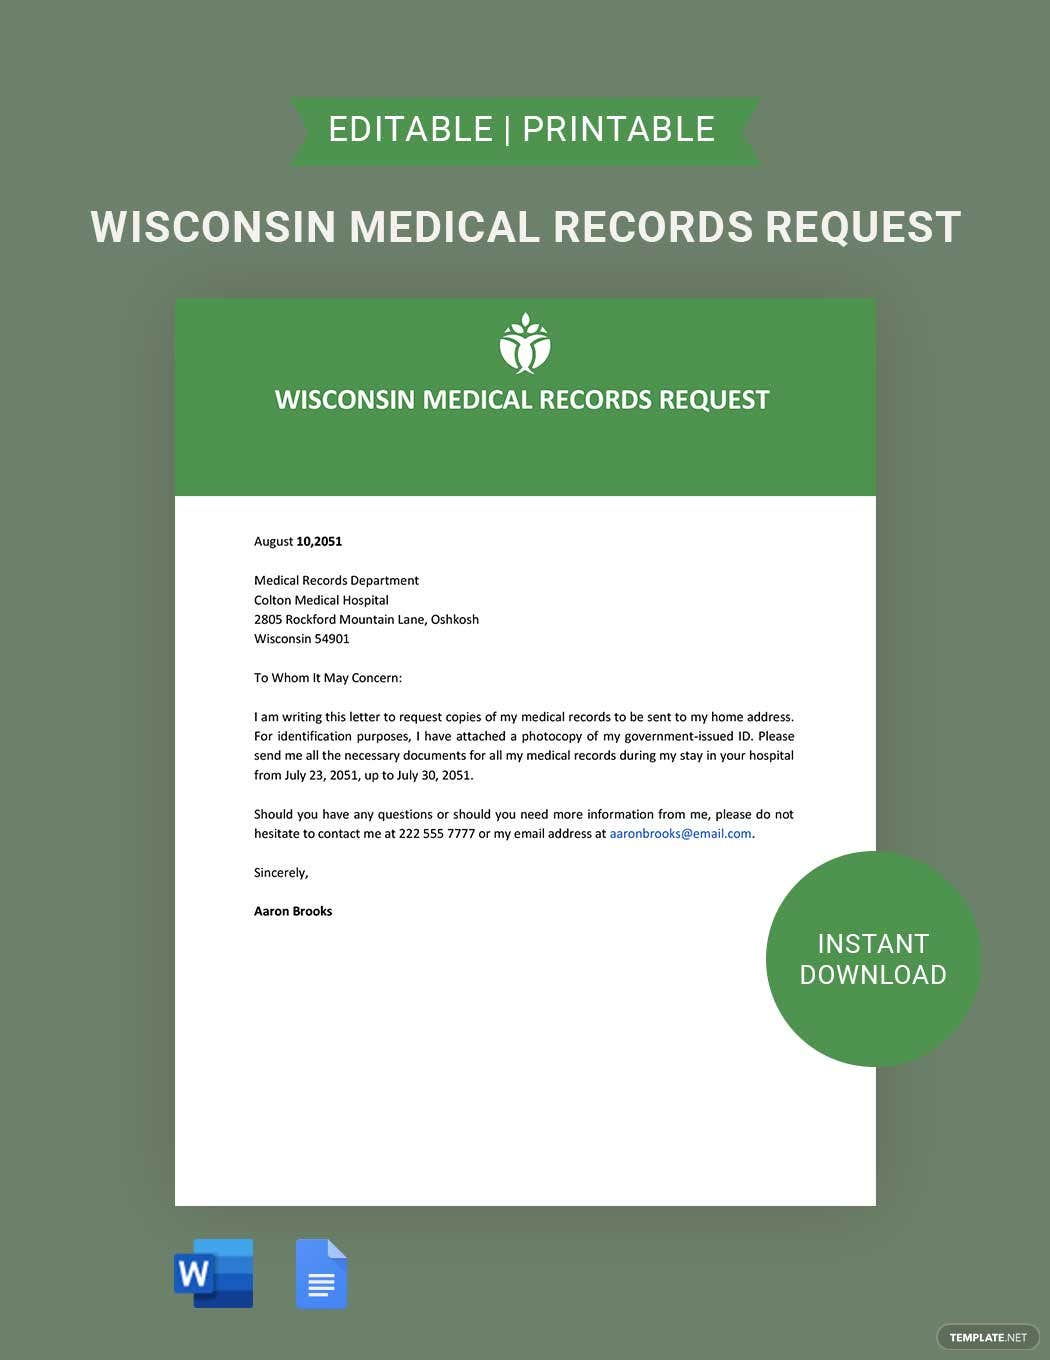 wisconsin medical records request ideas and examples